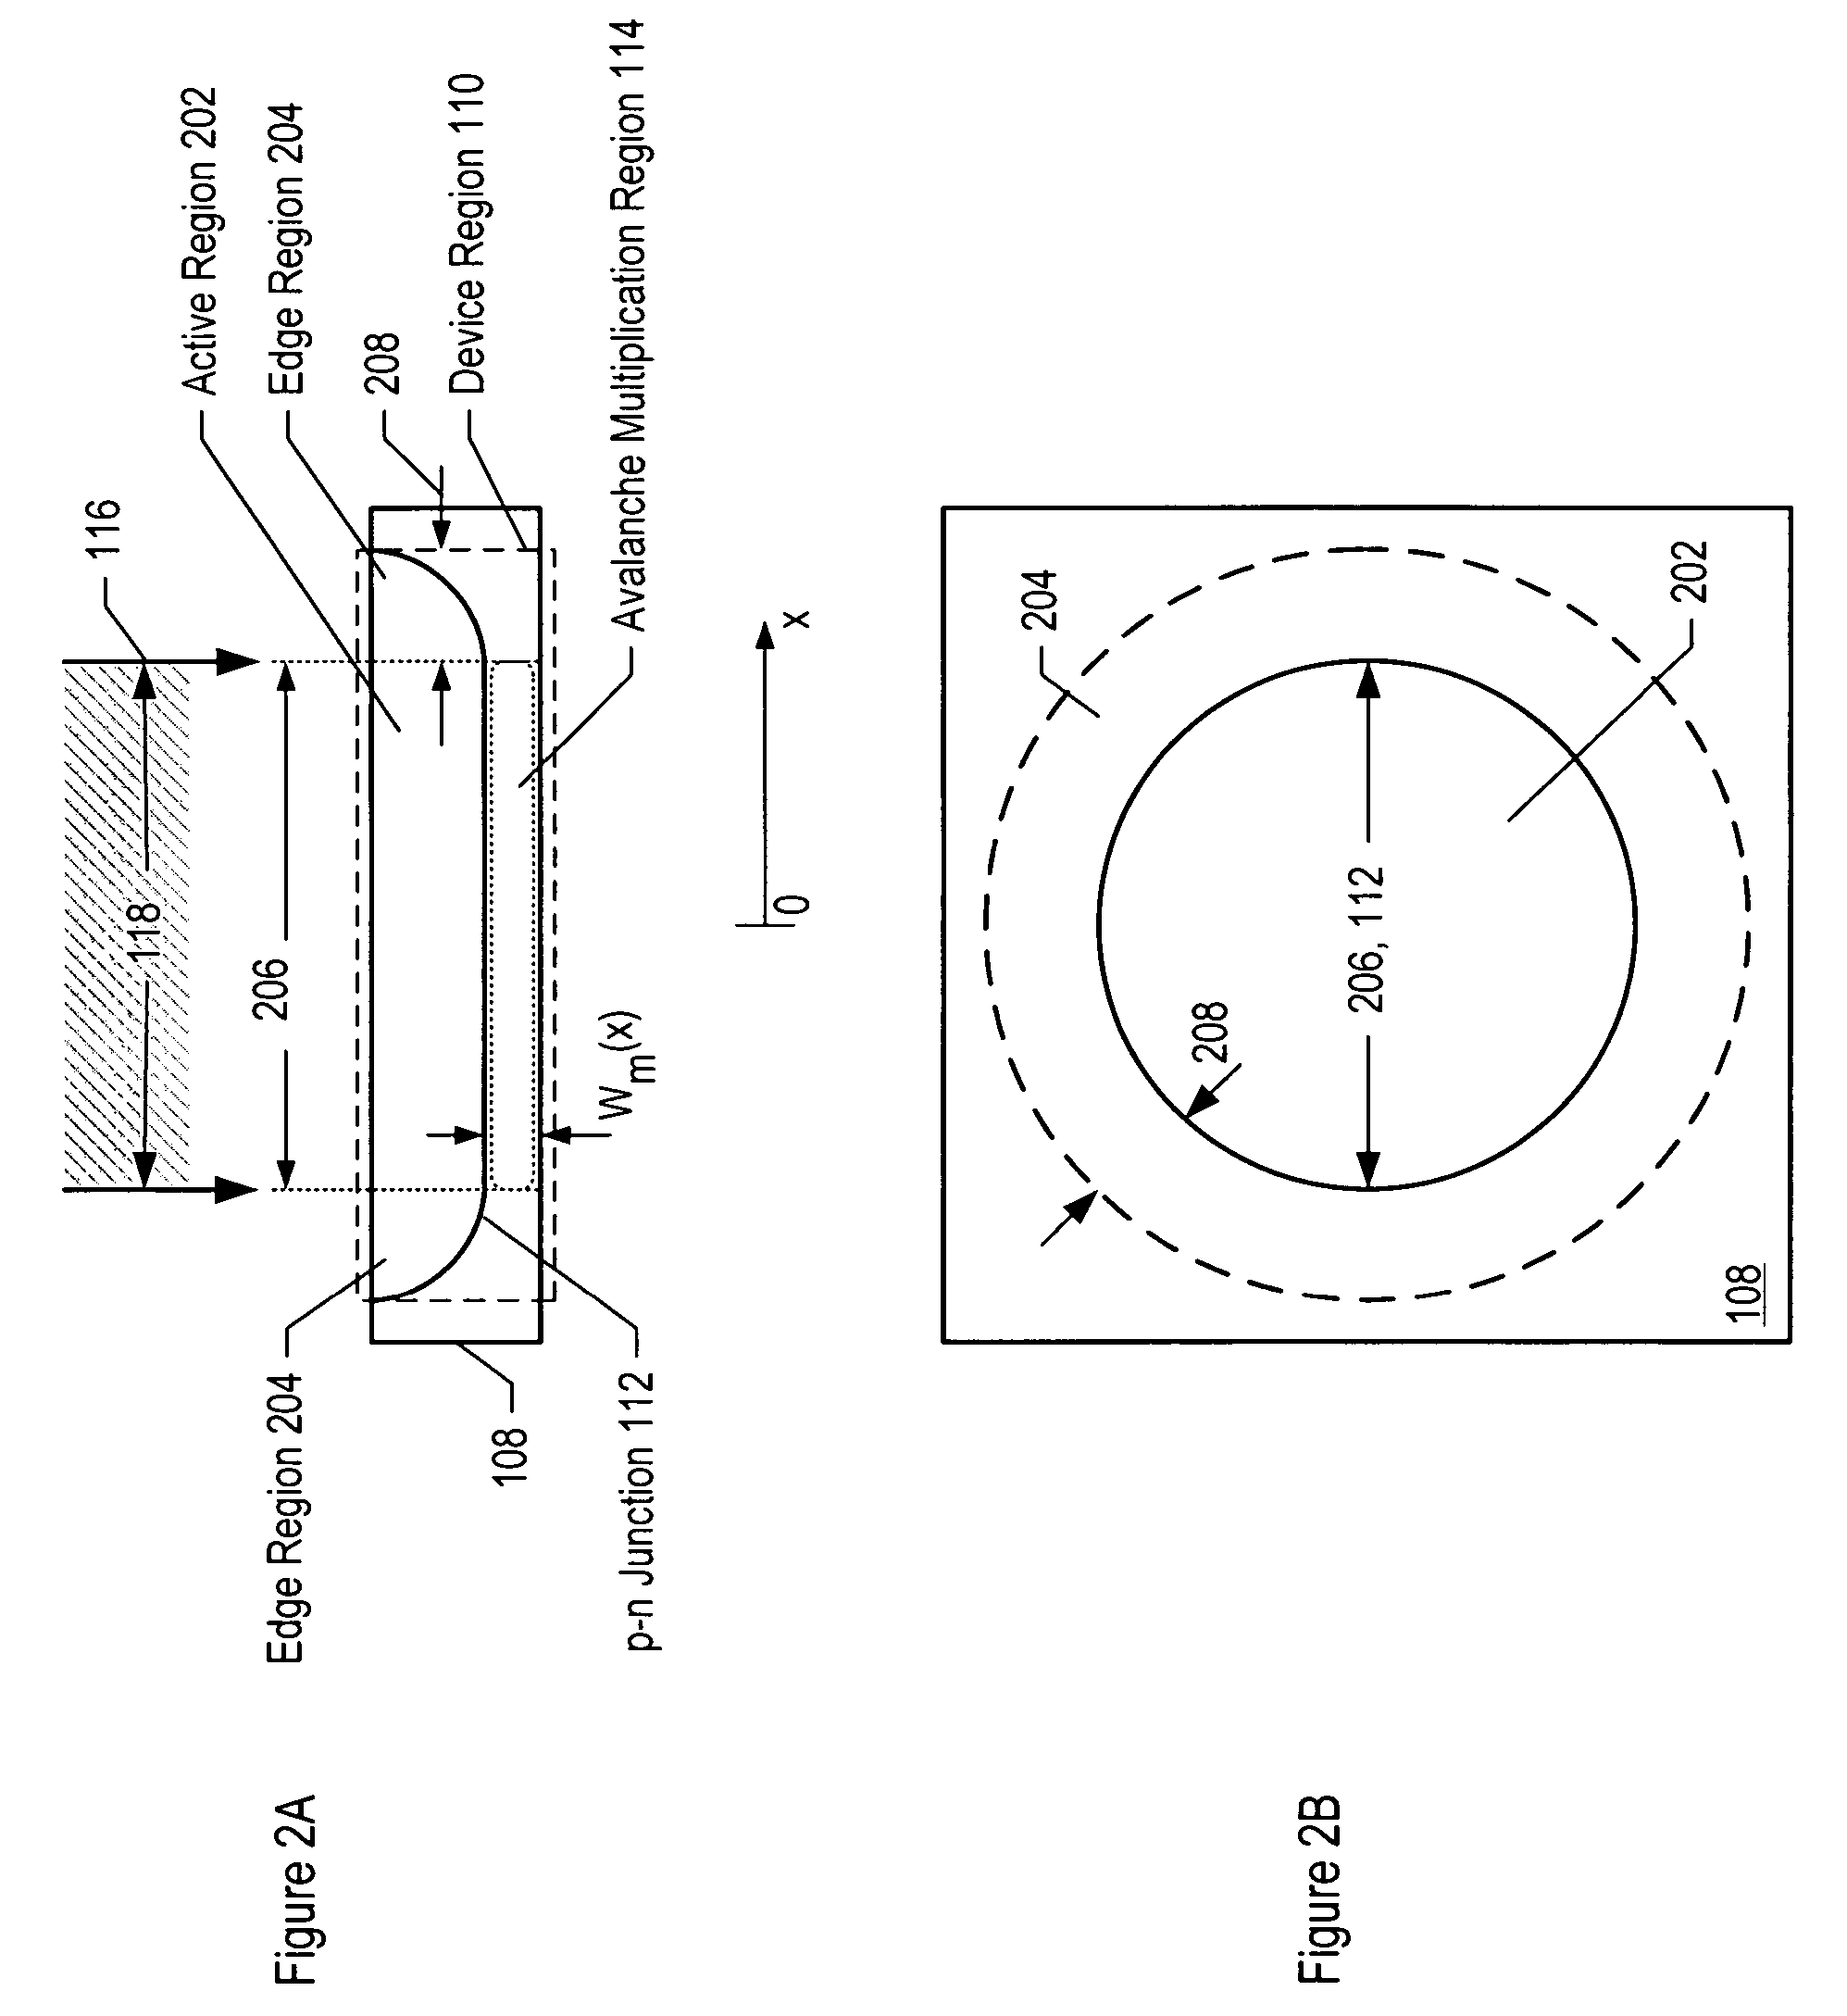 Method for forming an avalanche photodiode